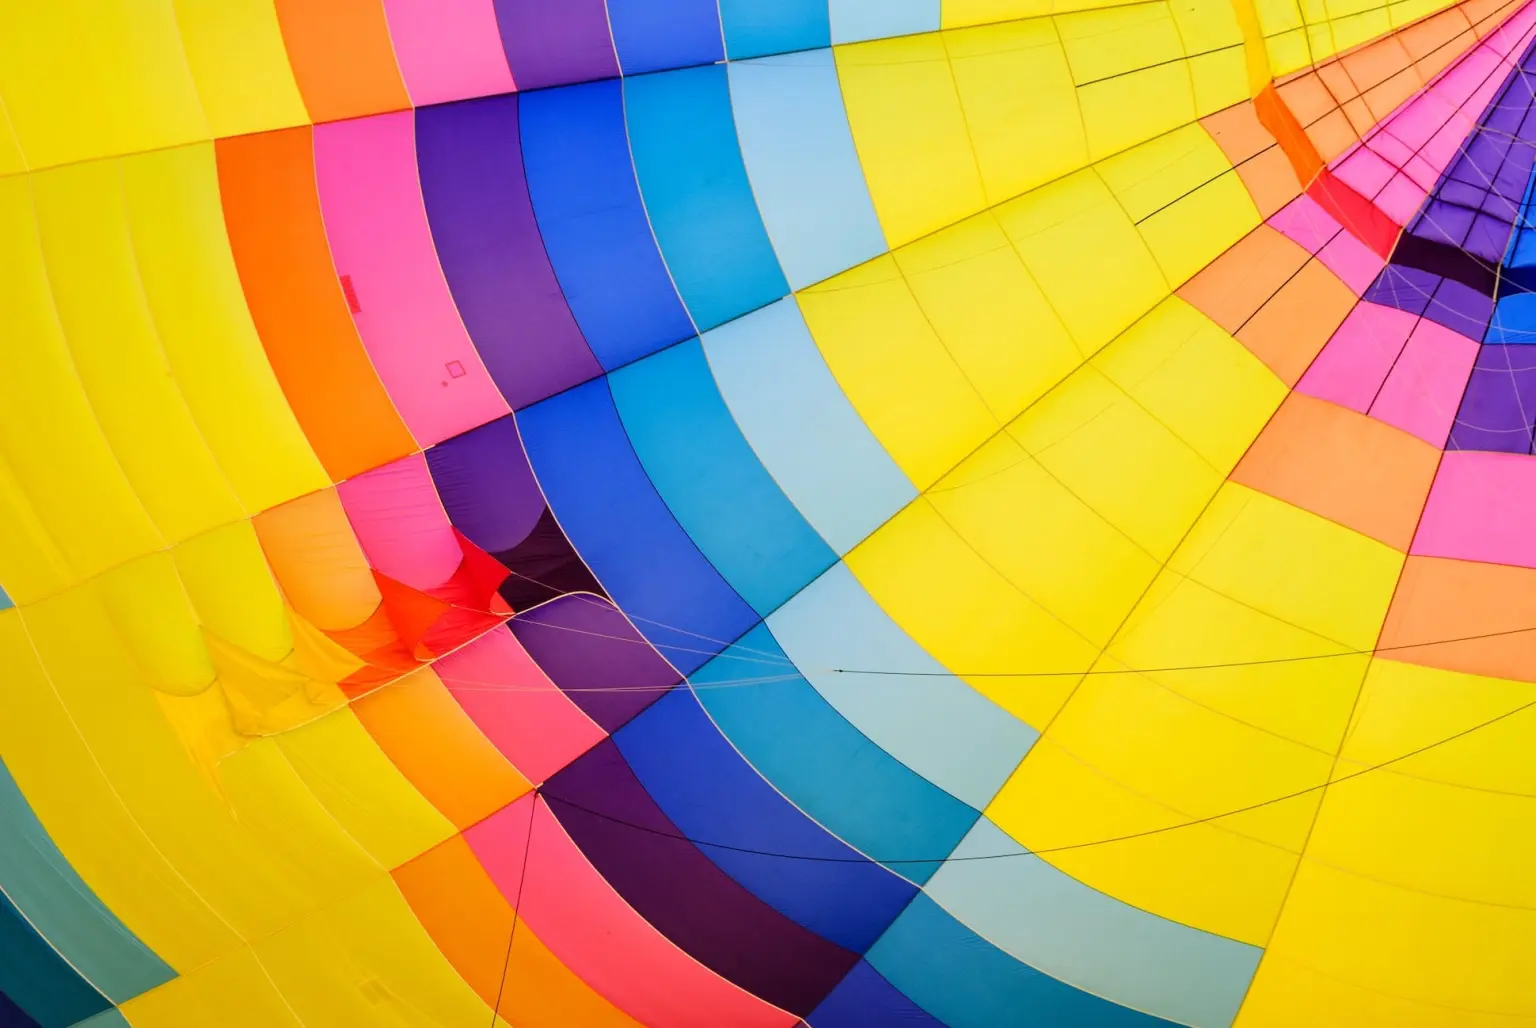 Image-of-hot-air-balloon-by-Pexels-for-Pixabay